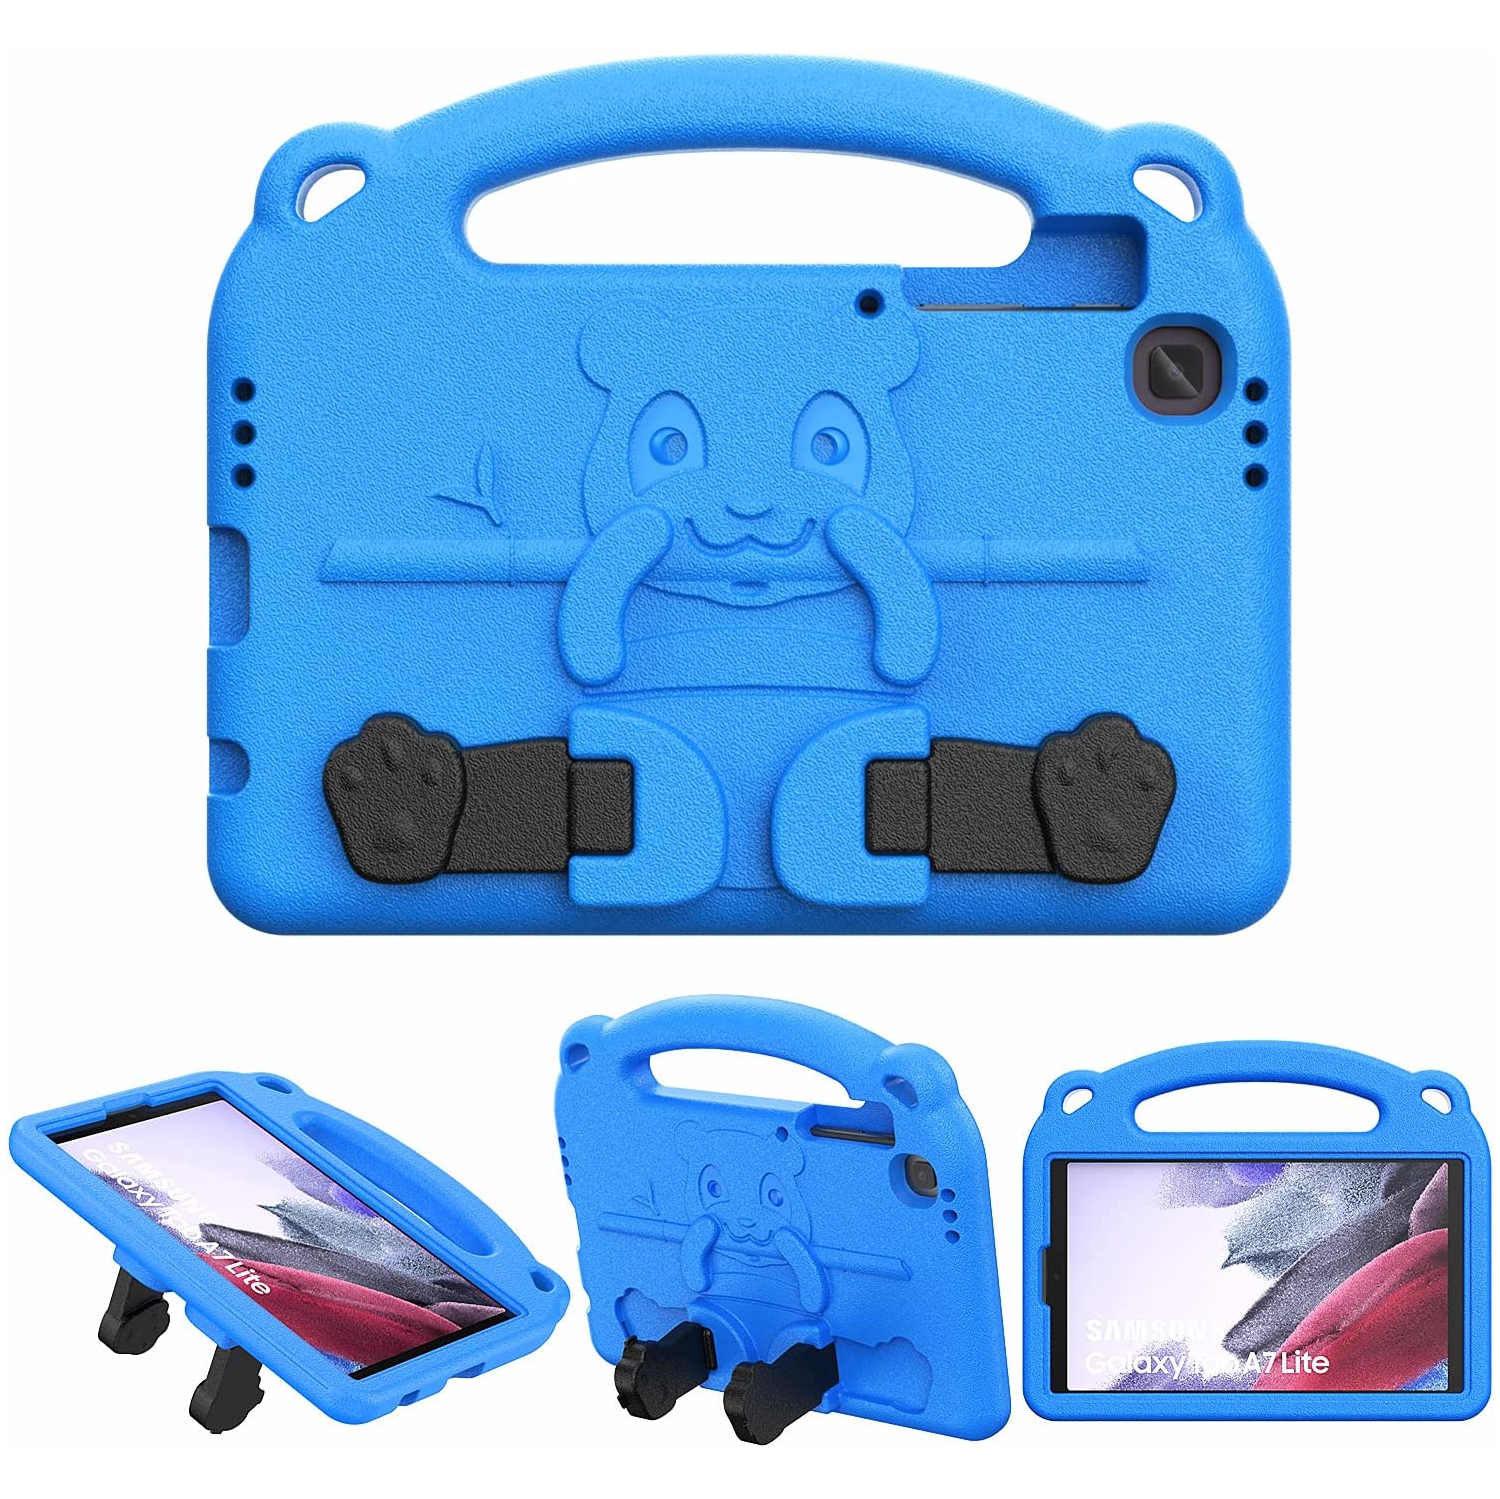 T Kids Case for Samsung Galaxy Tab A7 Lite Tablet (SM-T220/T225/T227), Galaxy Tab A7 Lite Case for Kids, Lightweight Handle Stand Kids Friendly Cover fit Galaxy Tab A7 Lite 8.7 202